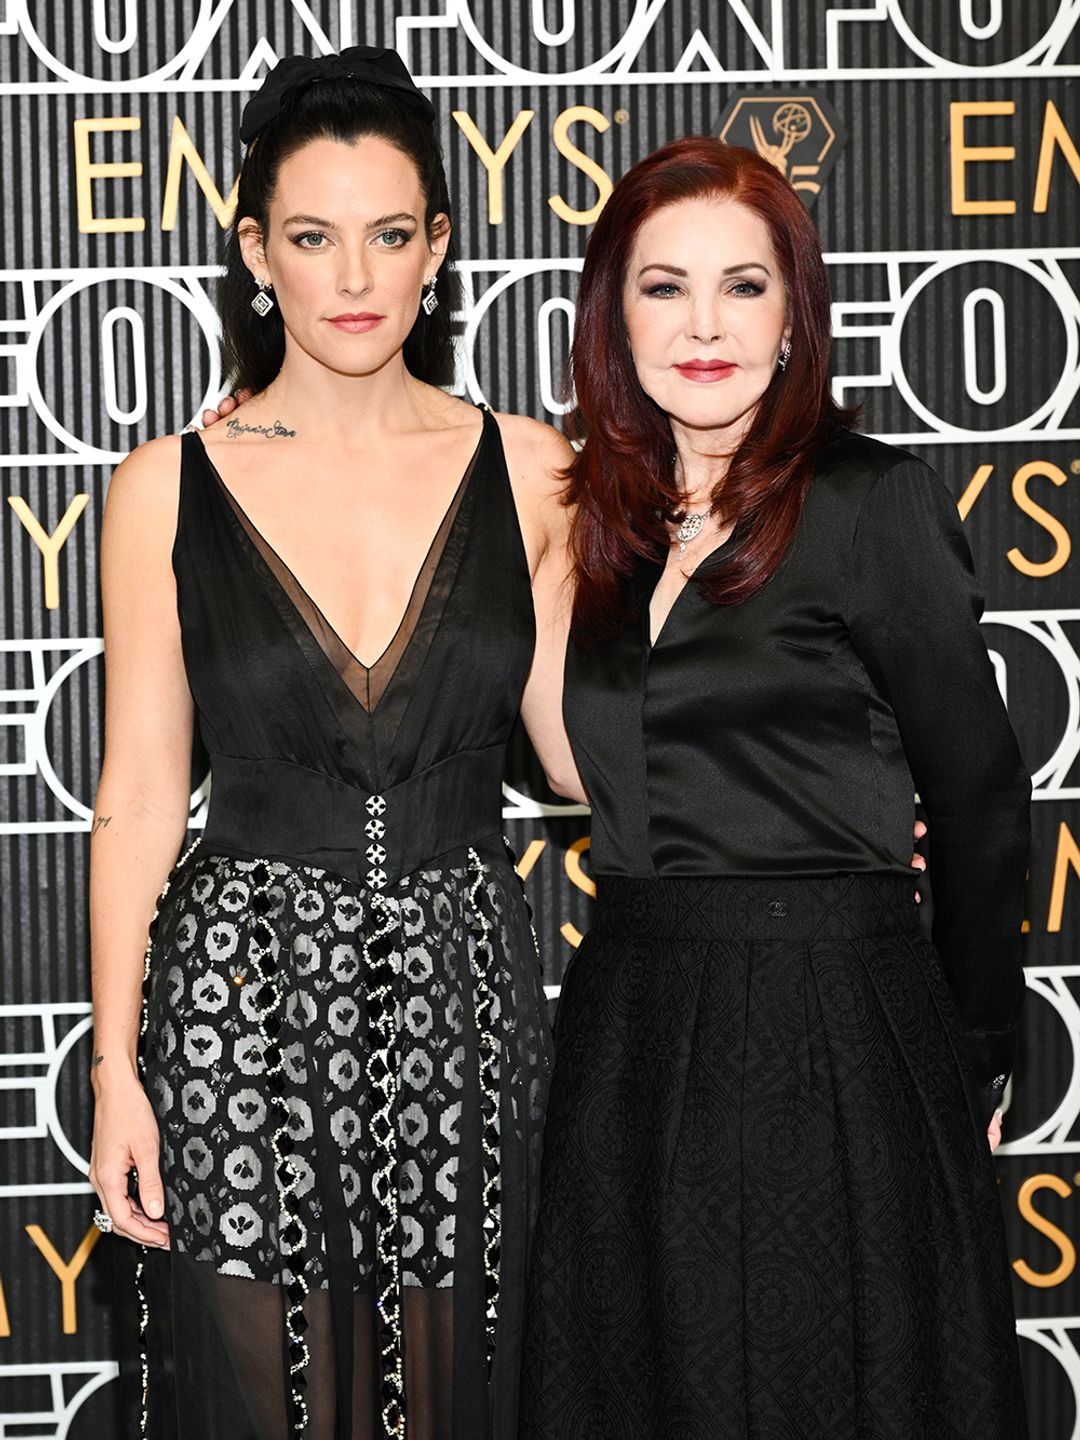 Riley Keough and her grandmother Priscilla Presley at the Emmys